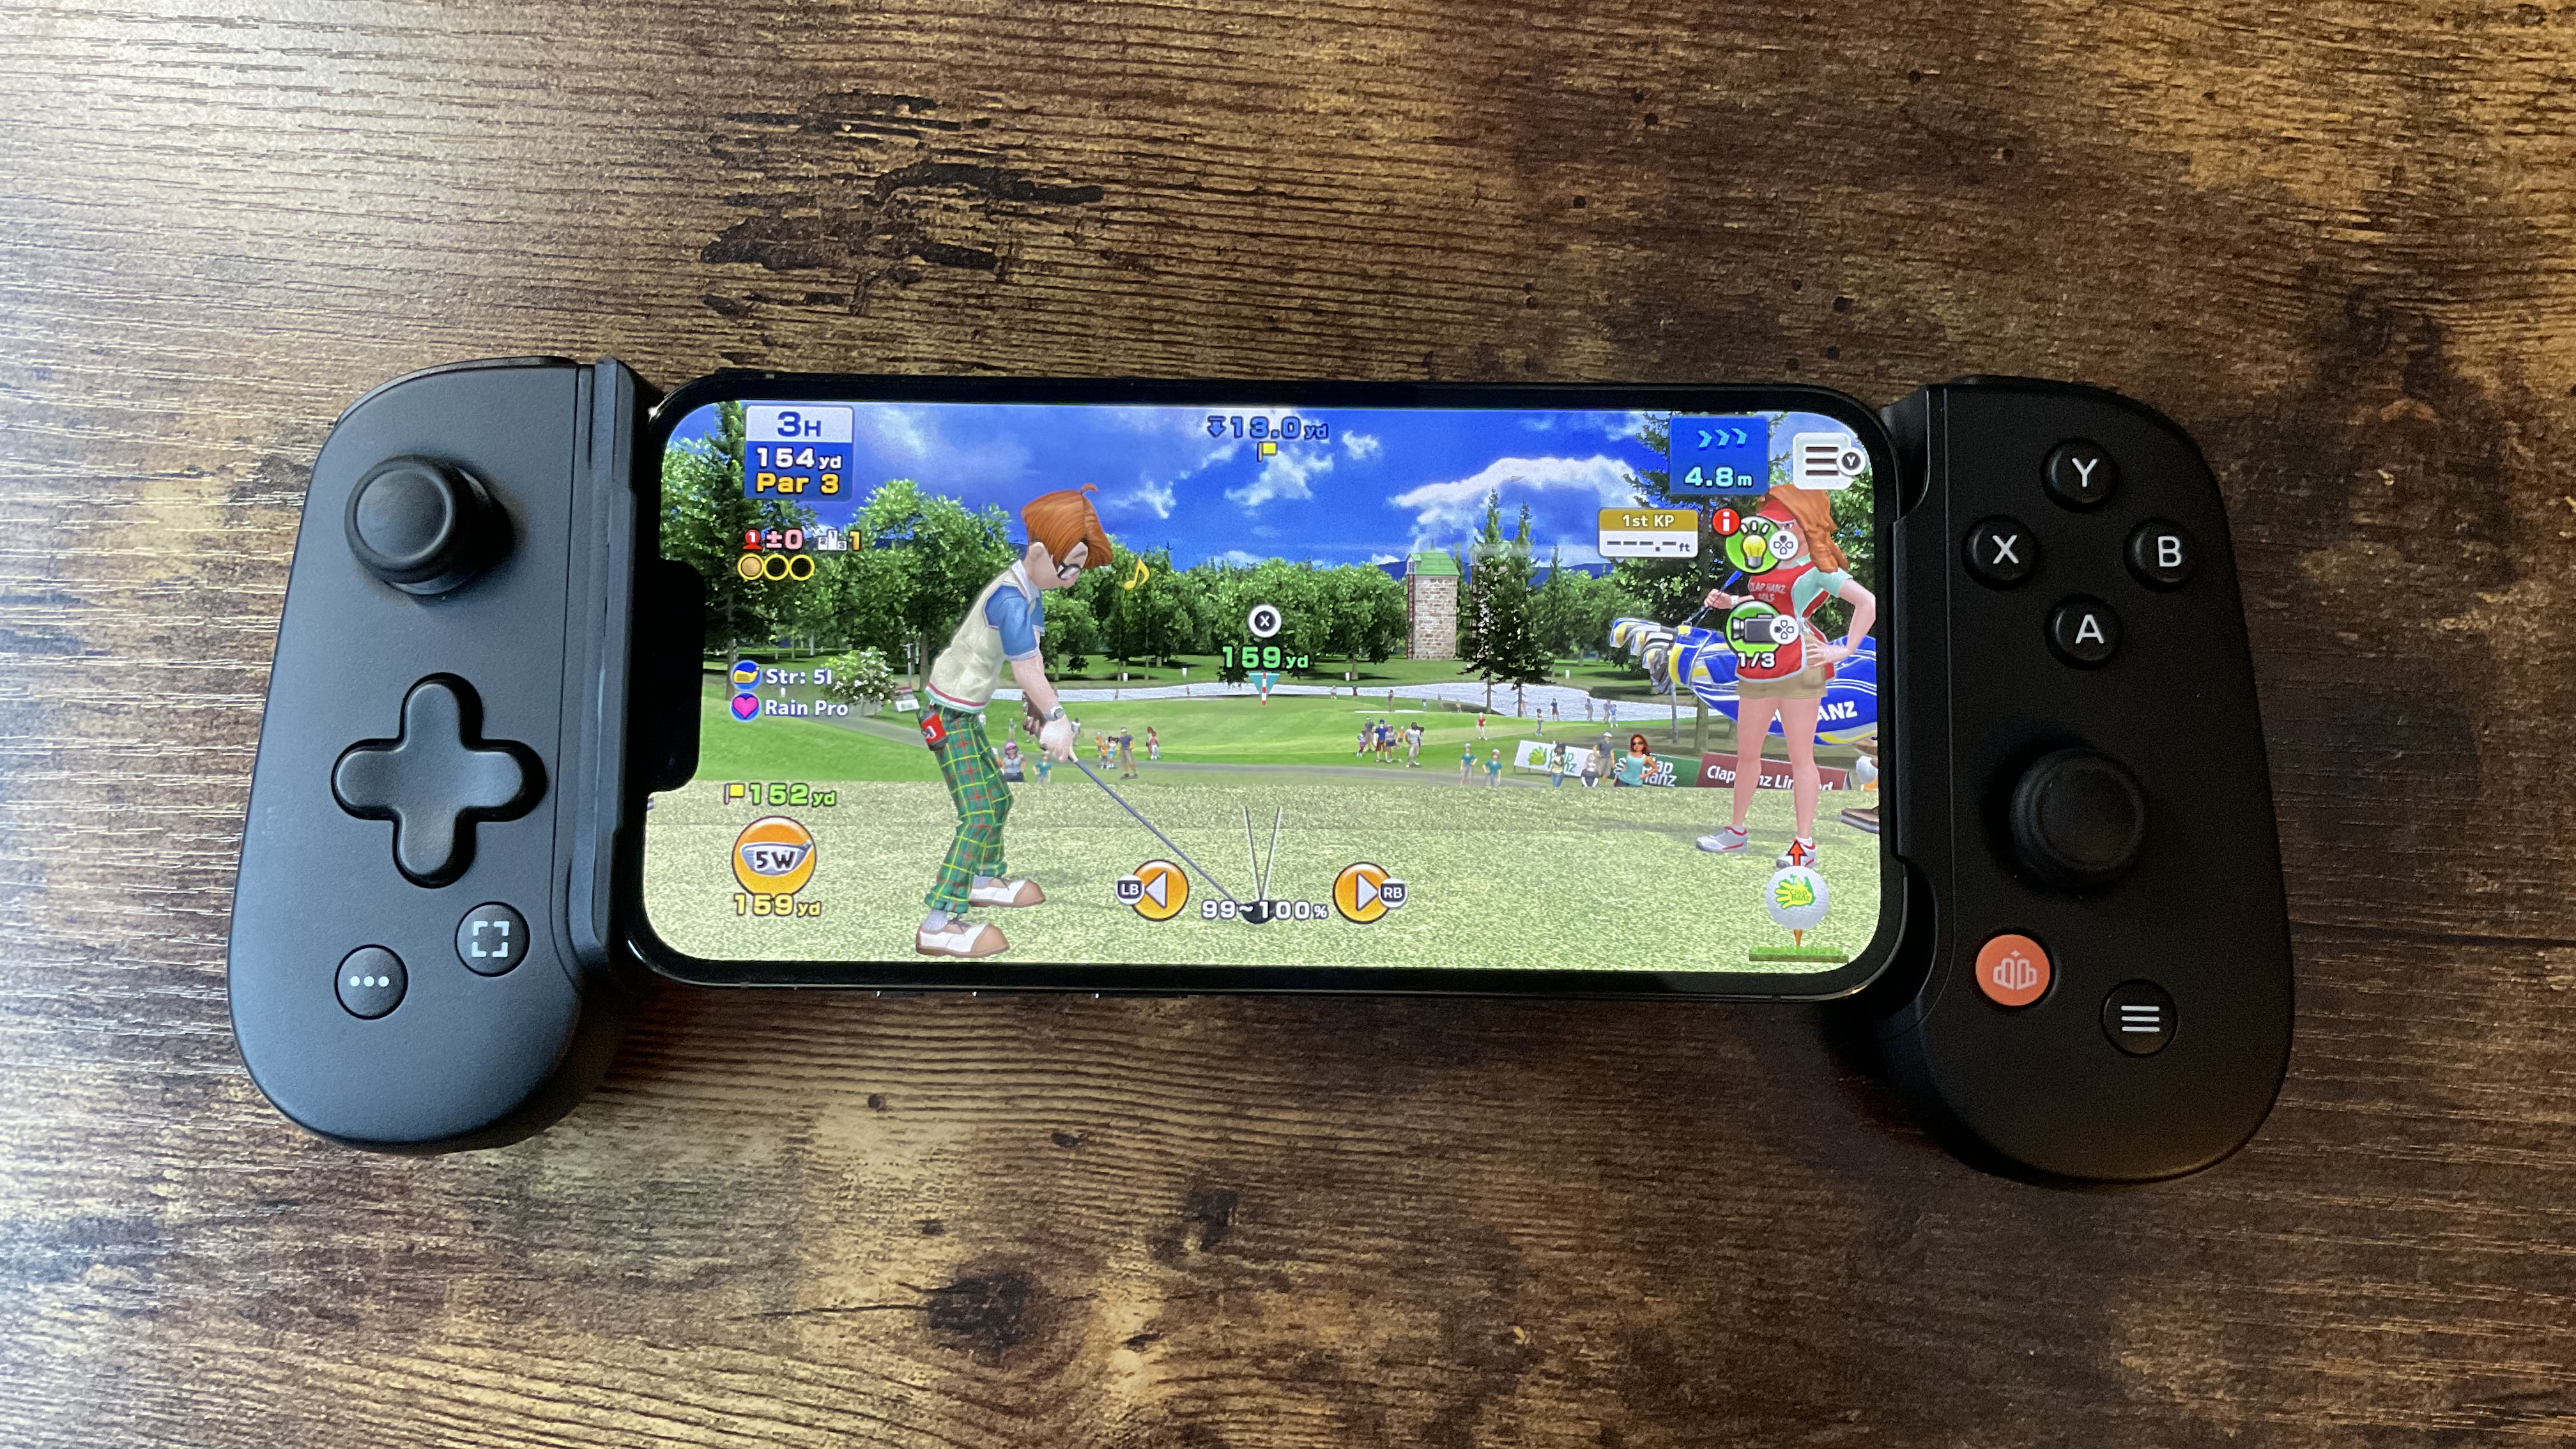 Backbone One iOS controller review